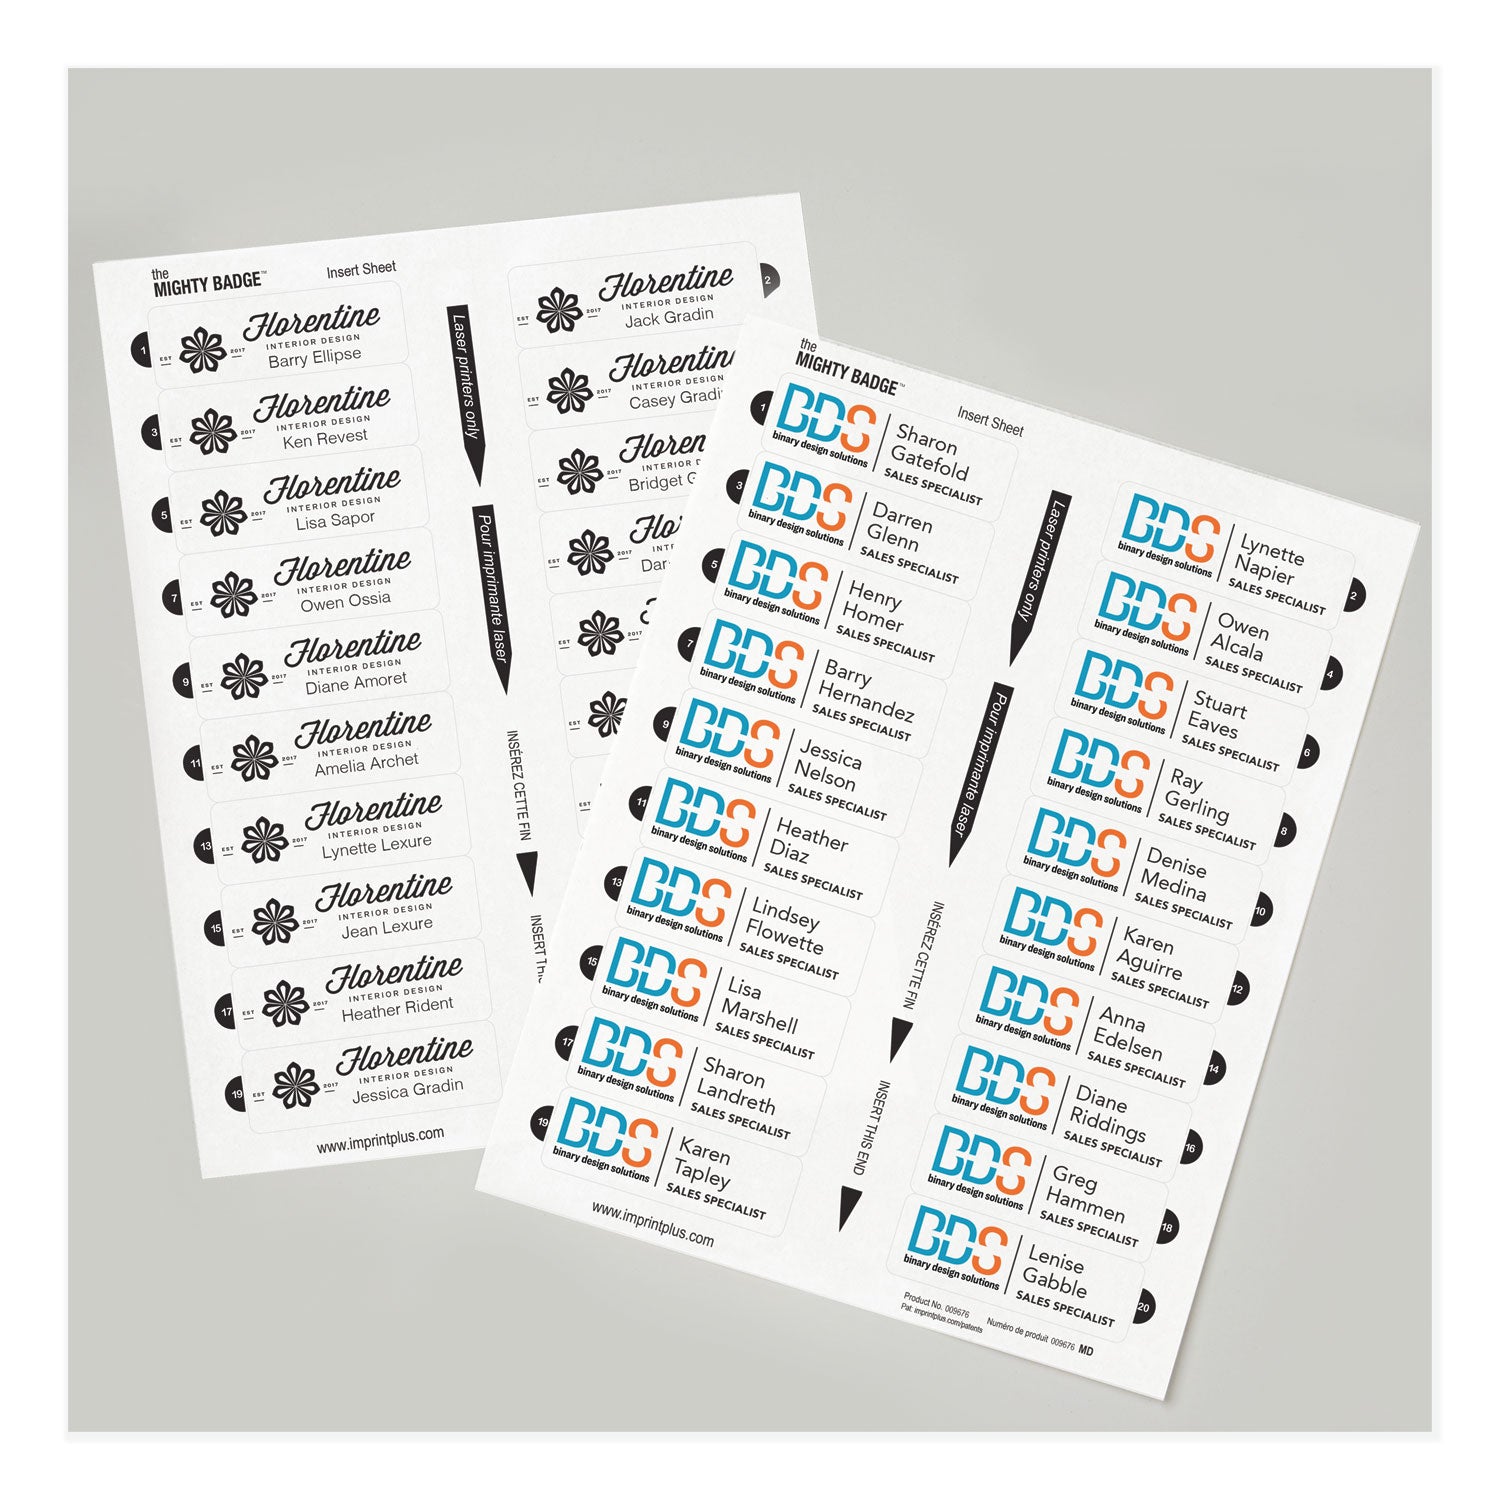 the-mighty-badge-name-badge-inserts-1-x-3-clear-laser-20-sheet-5-sheets-pack_ave71210 - 8